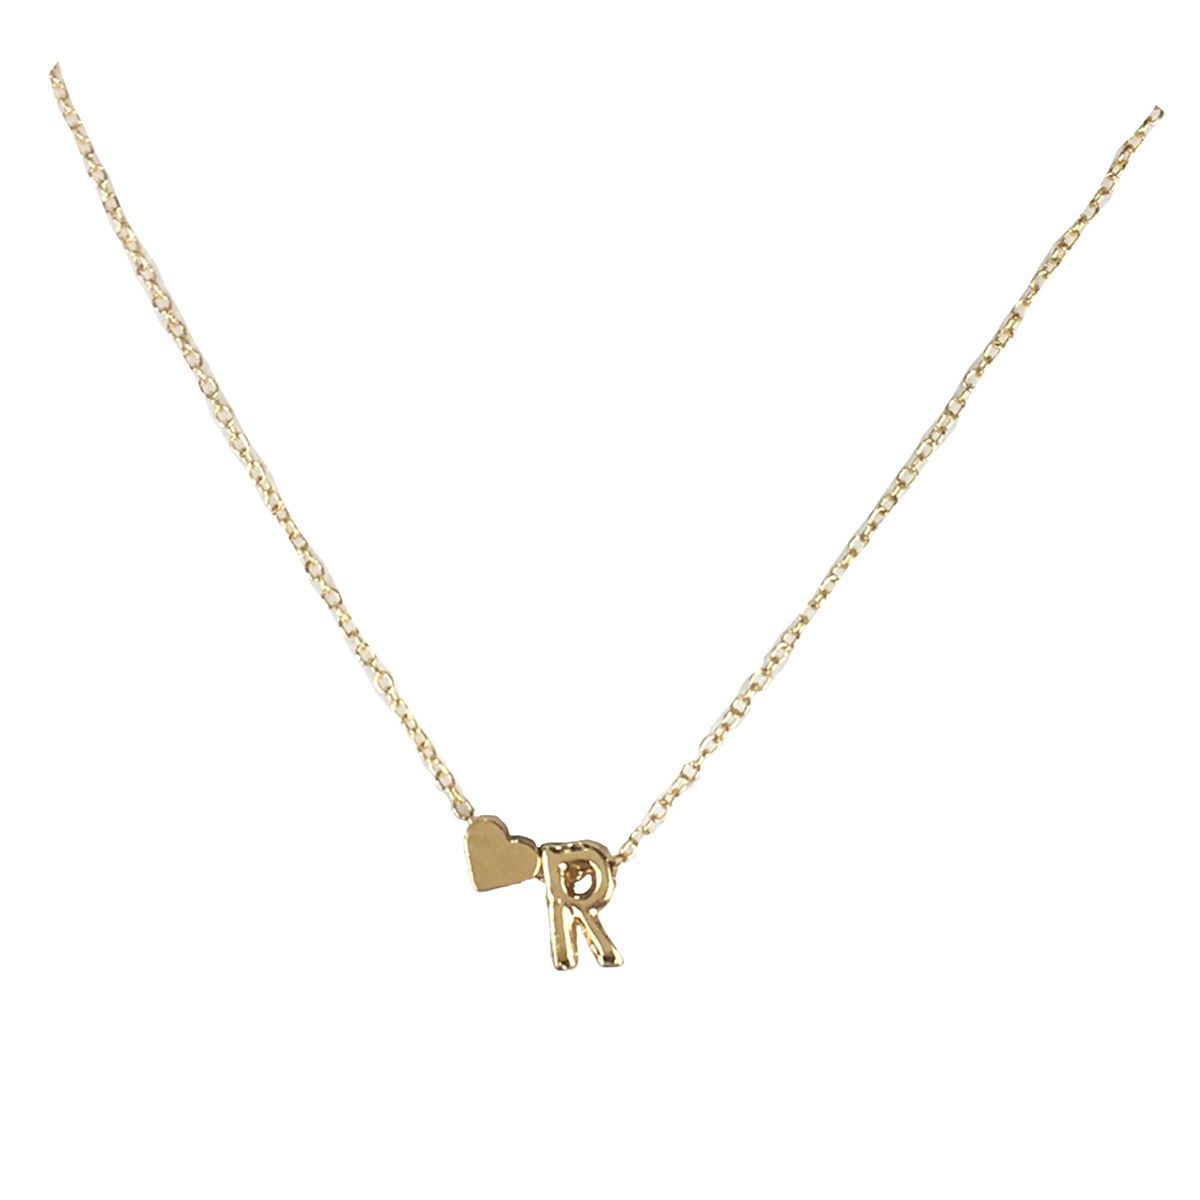 18K YELLOW GOLD TINY TREASURES SCRIPT INITIAL 'R' NECKLACE - Roberto Coin -  North America